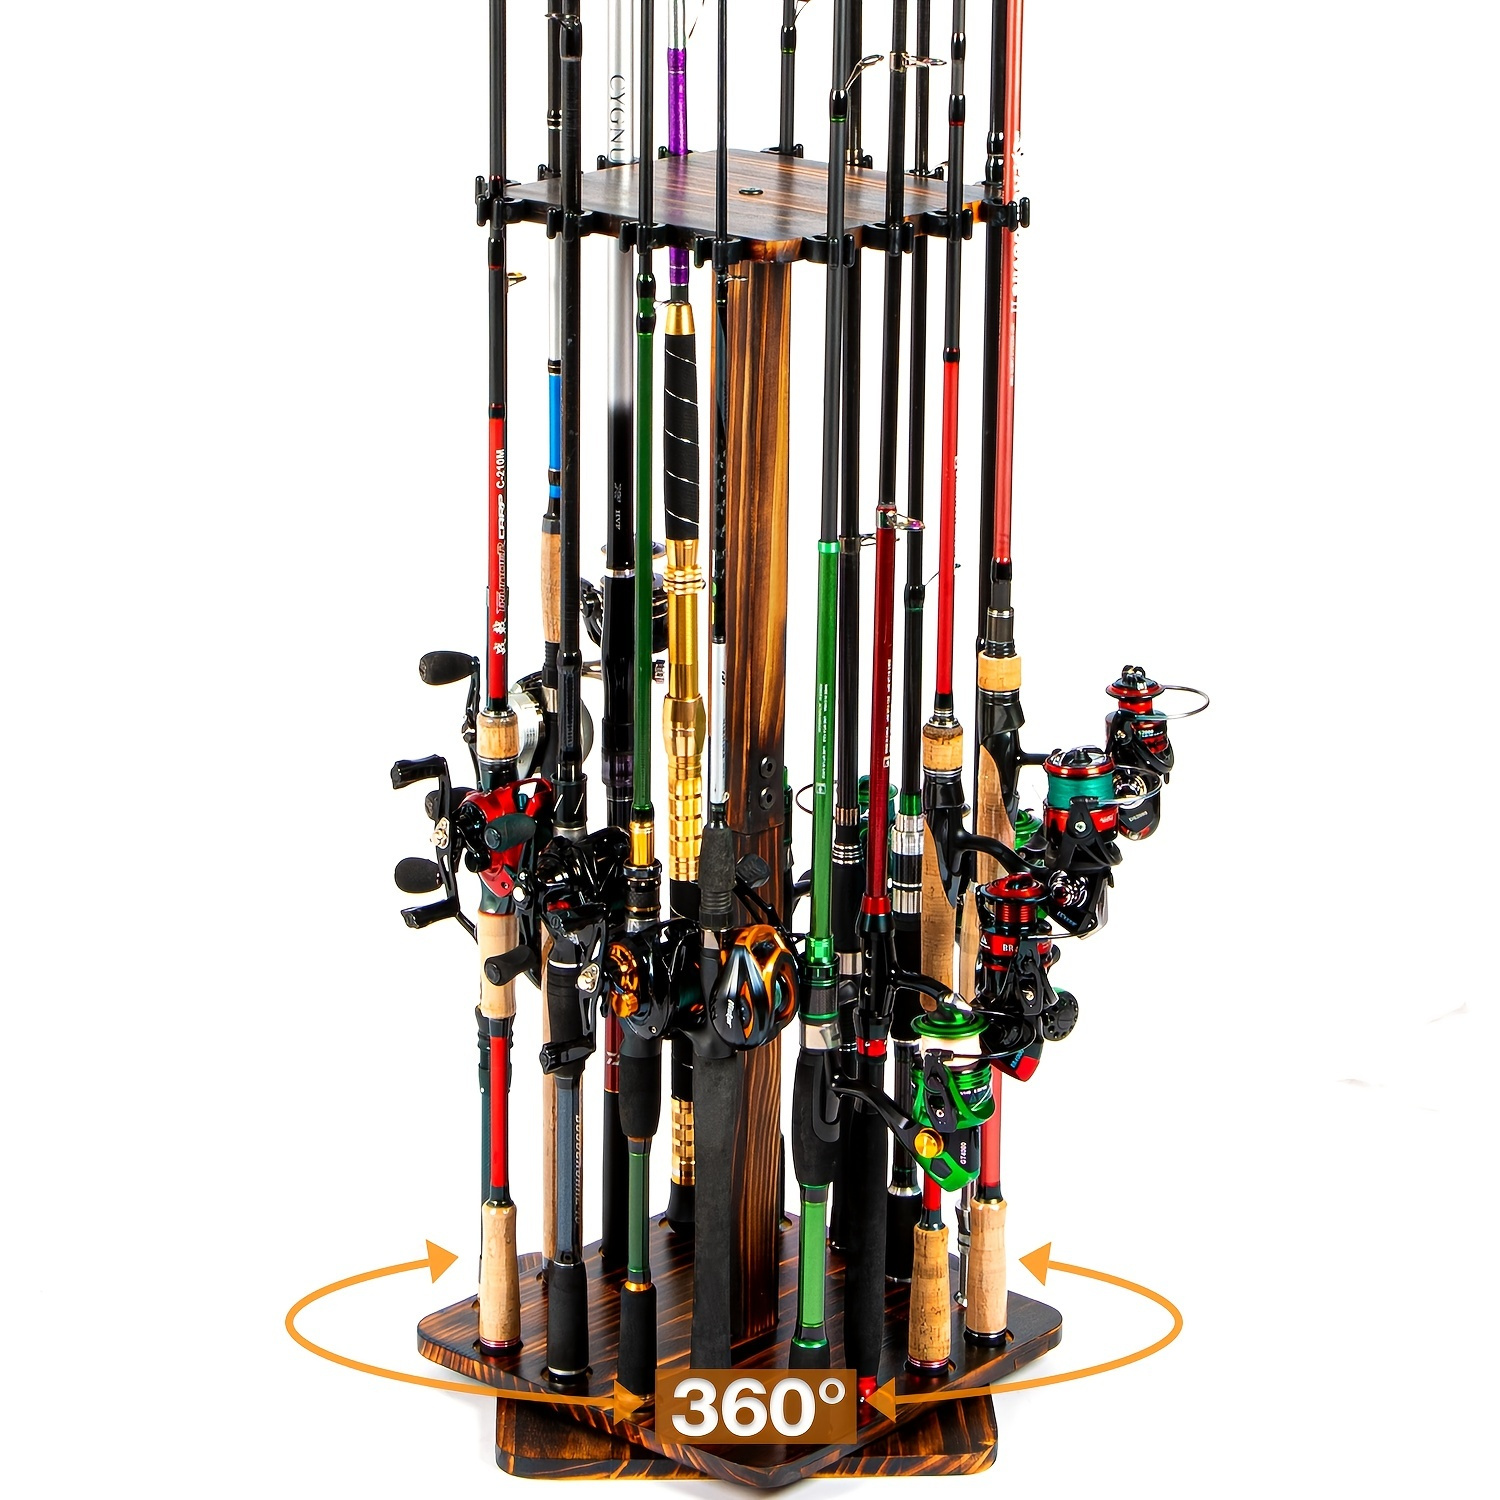 

Fishing Rod Pole Holders Rack, 360 Degree Rotating Garage Pole Floor Stand Holds Up To 16 Rods Wood Vertical Upright Fishing Gear Equipment Storage Organizer,